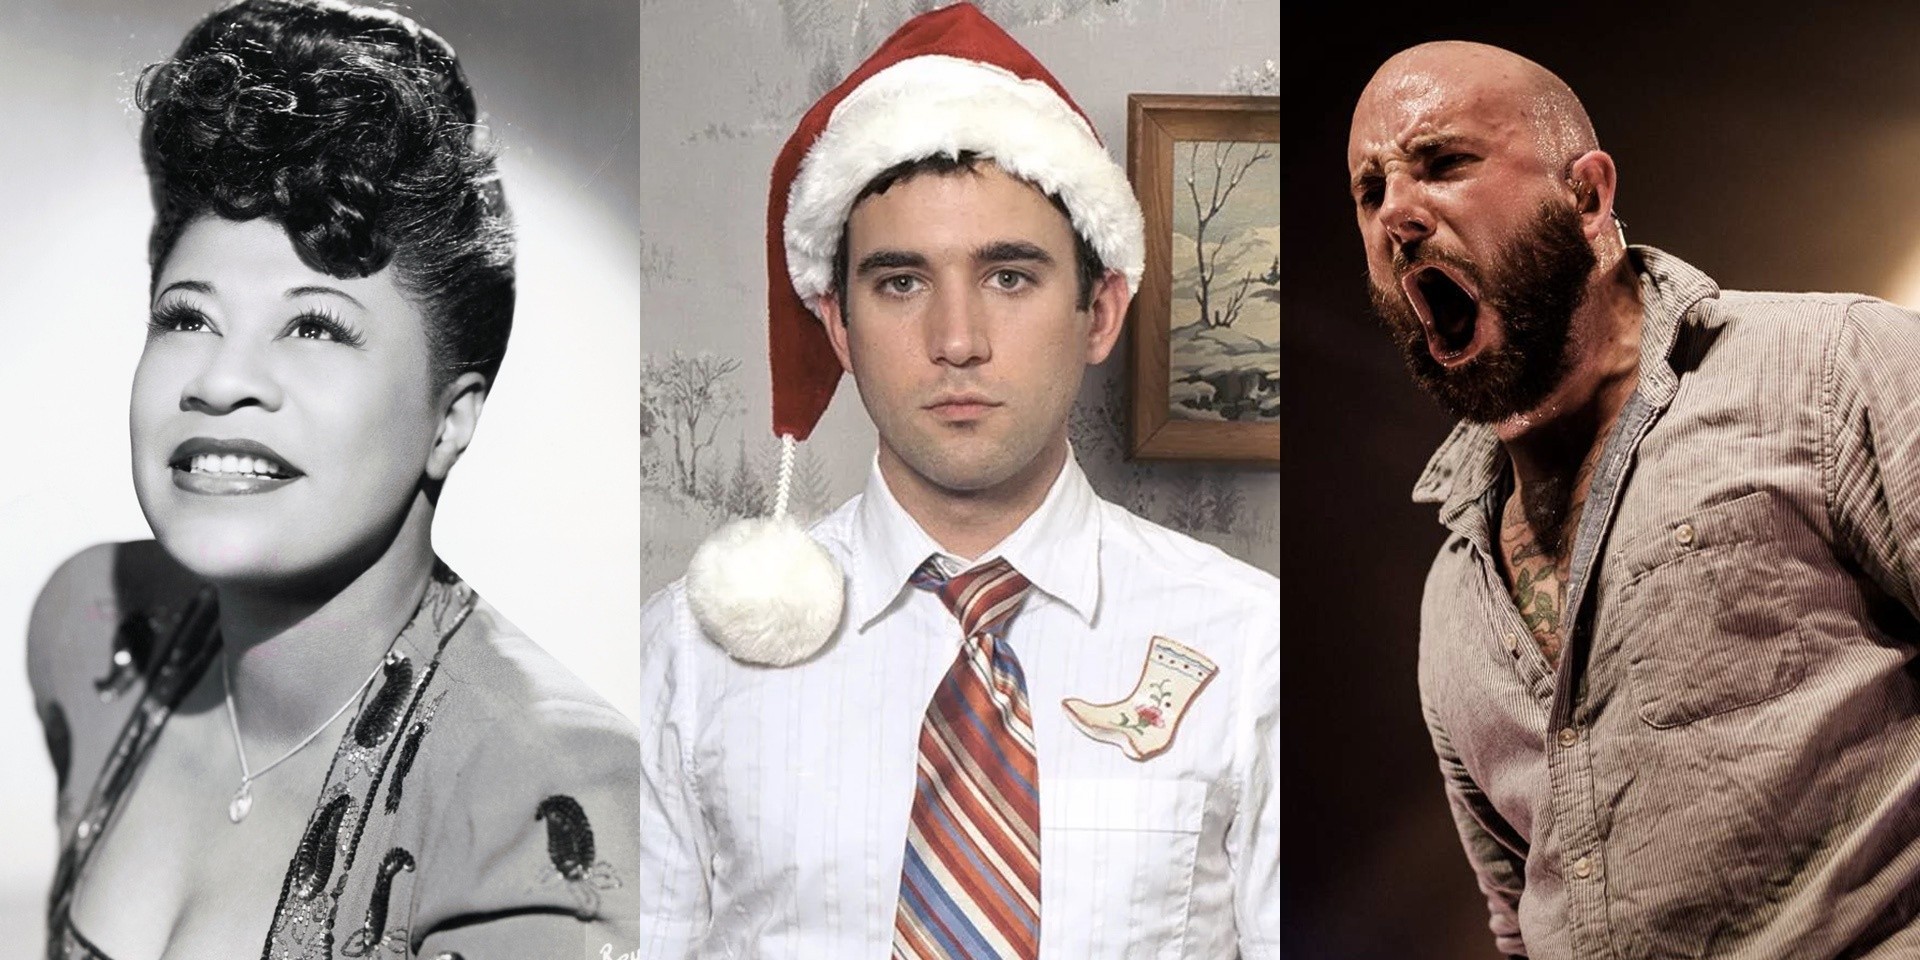 The best Christmas albums to stream over the holidays